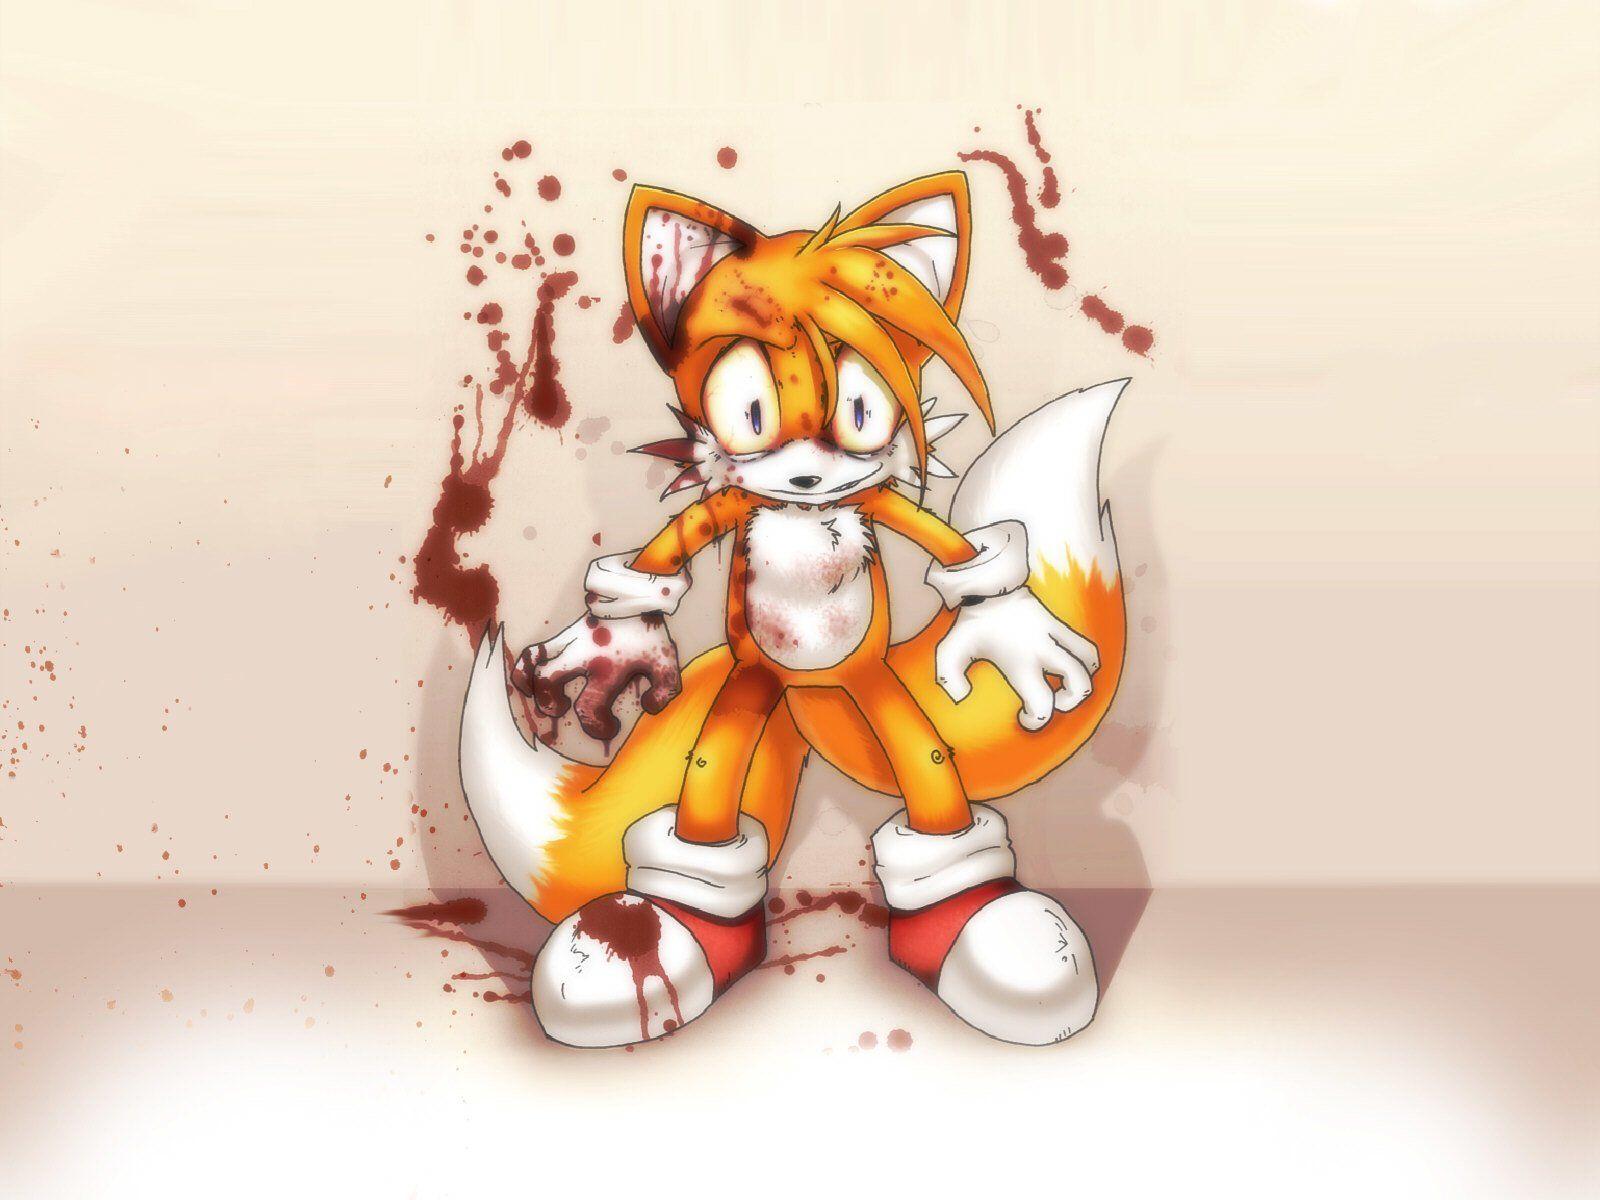 Cute Tails Wallpaper by AlexKirby1989 on DeviantArt